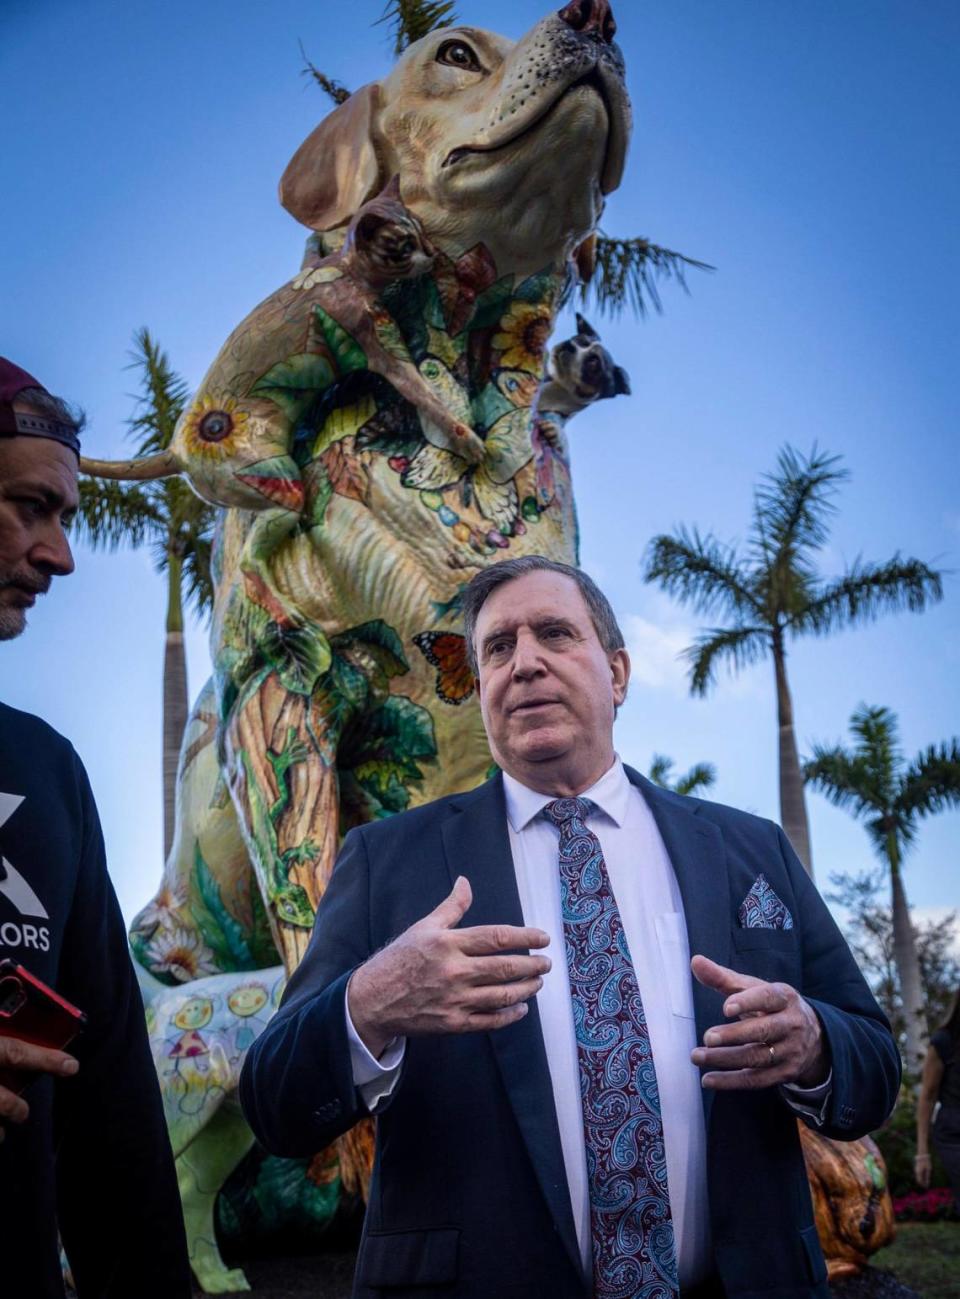 With the statue of a Labrador Retriever called Chócolo by local artist Luis Miguel Rodriguez looming in the background, Miami City Commissioner Joe Carollo, center, talks to guests at the ribbon-cutting ceremony for the Dogs and Cats Walkway and Sculpture Gardens.